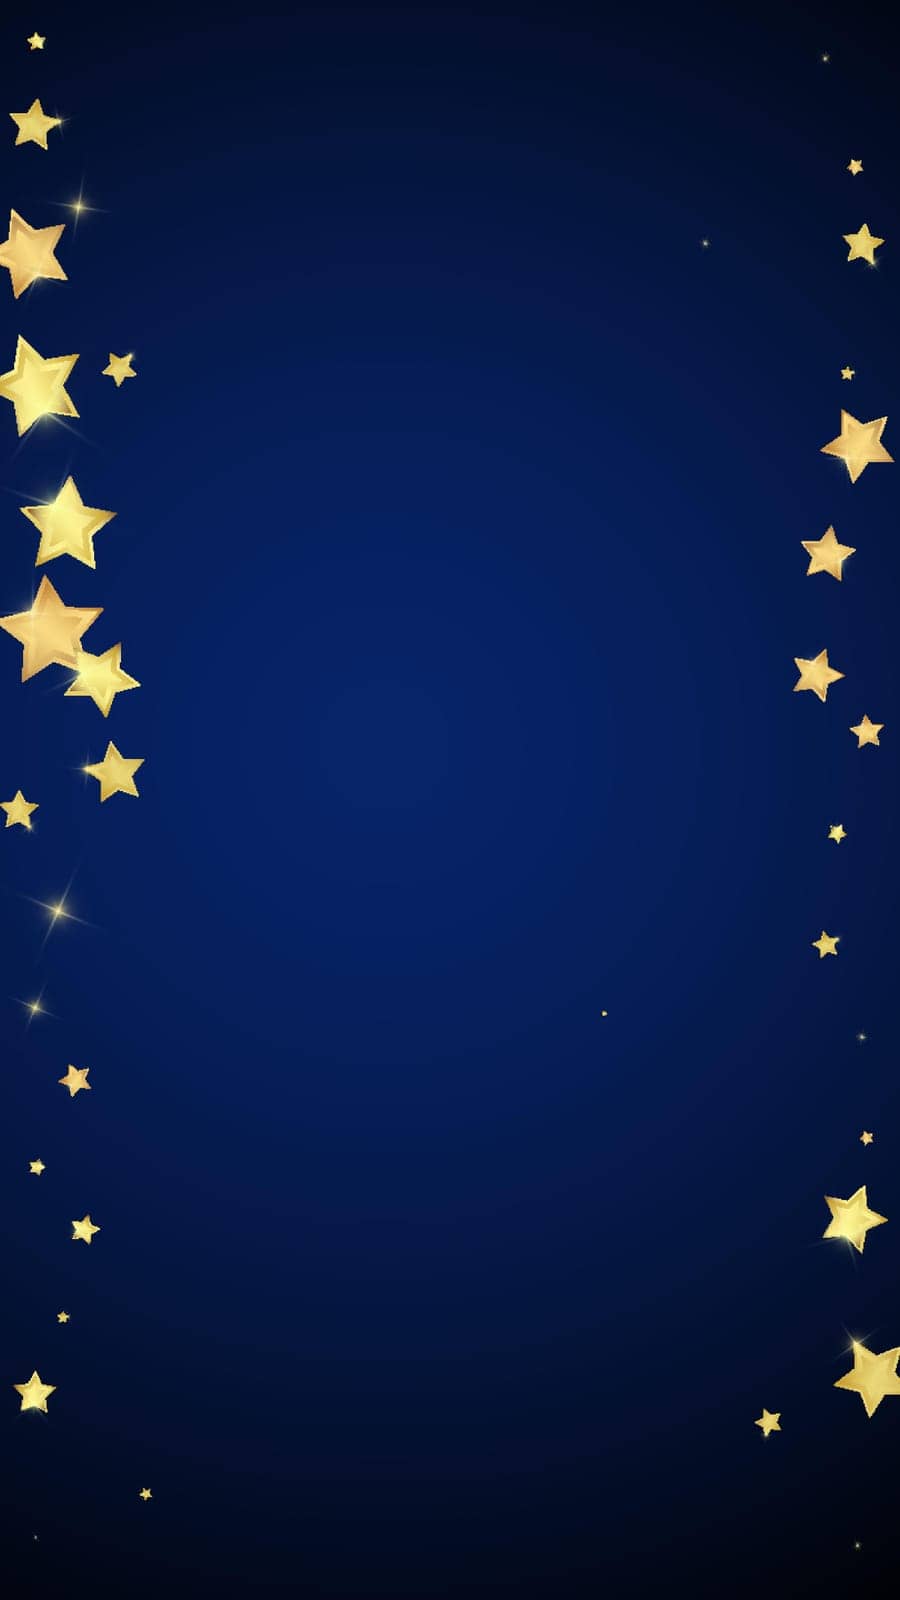 Magic stars vector overlay. Gold stars scattered around randomly, falling down, floating. Chaotic dreamy childish overlay template. Vector magic overlay on dark blue background.